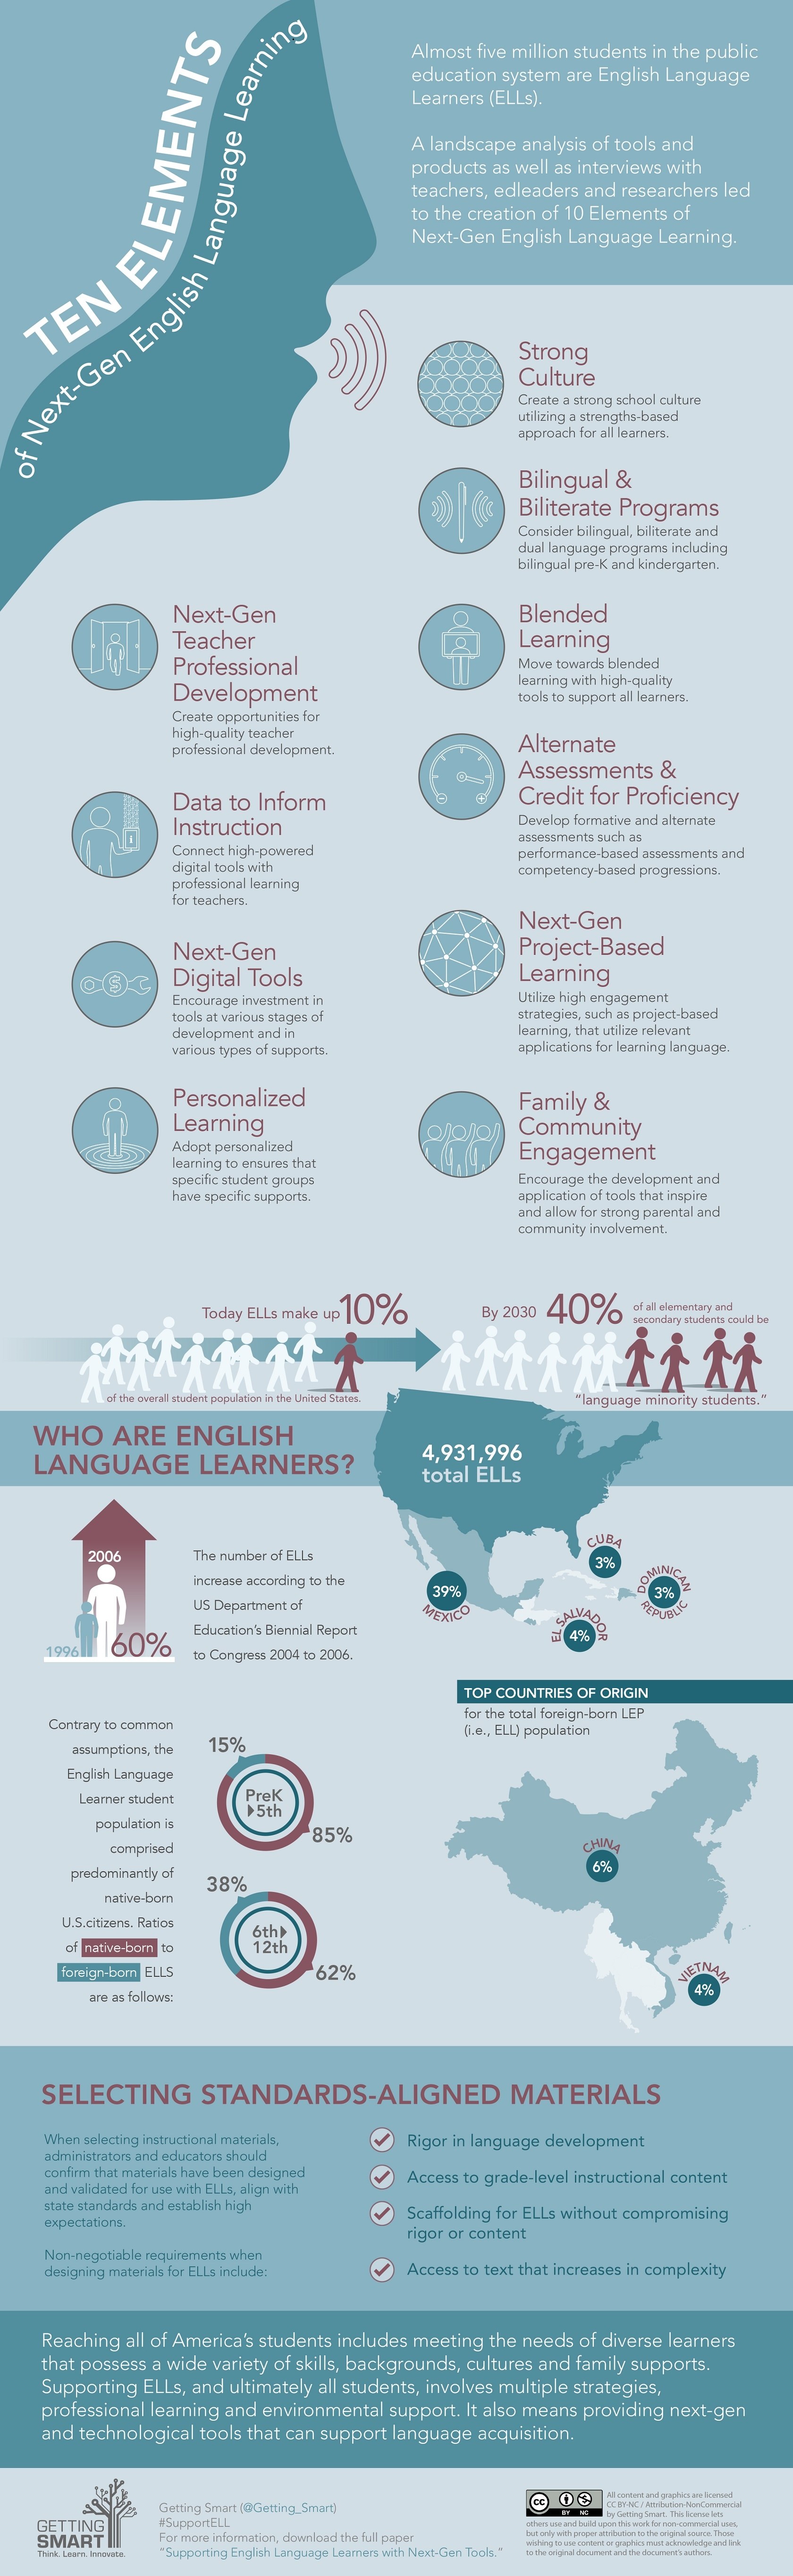 10 Elements of Next-Gen English Language Learning Infographic - e